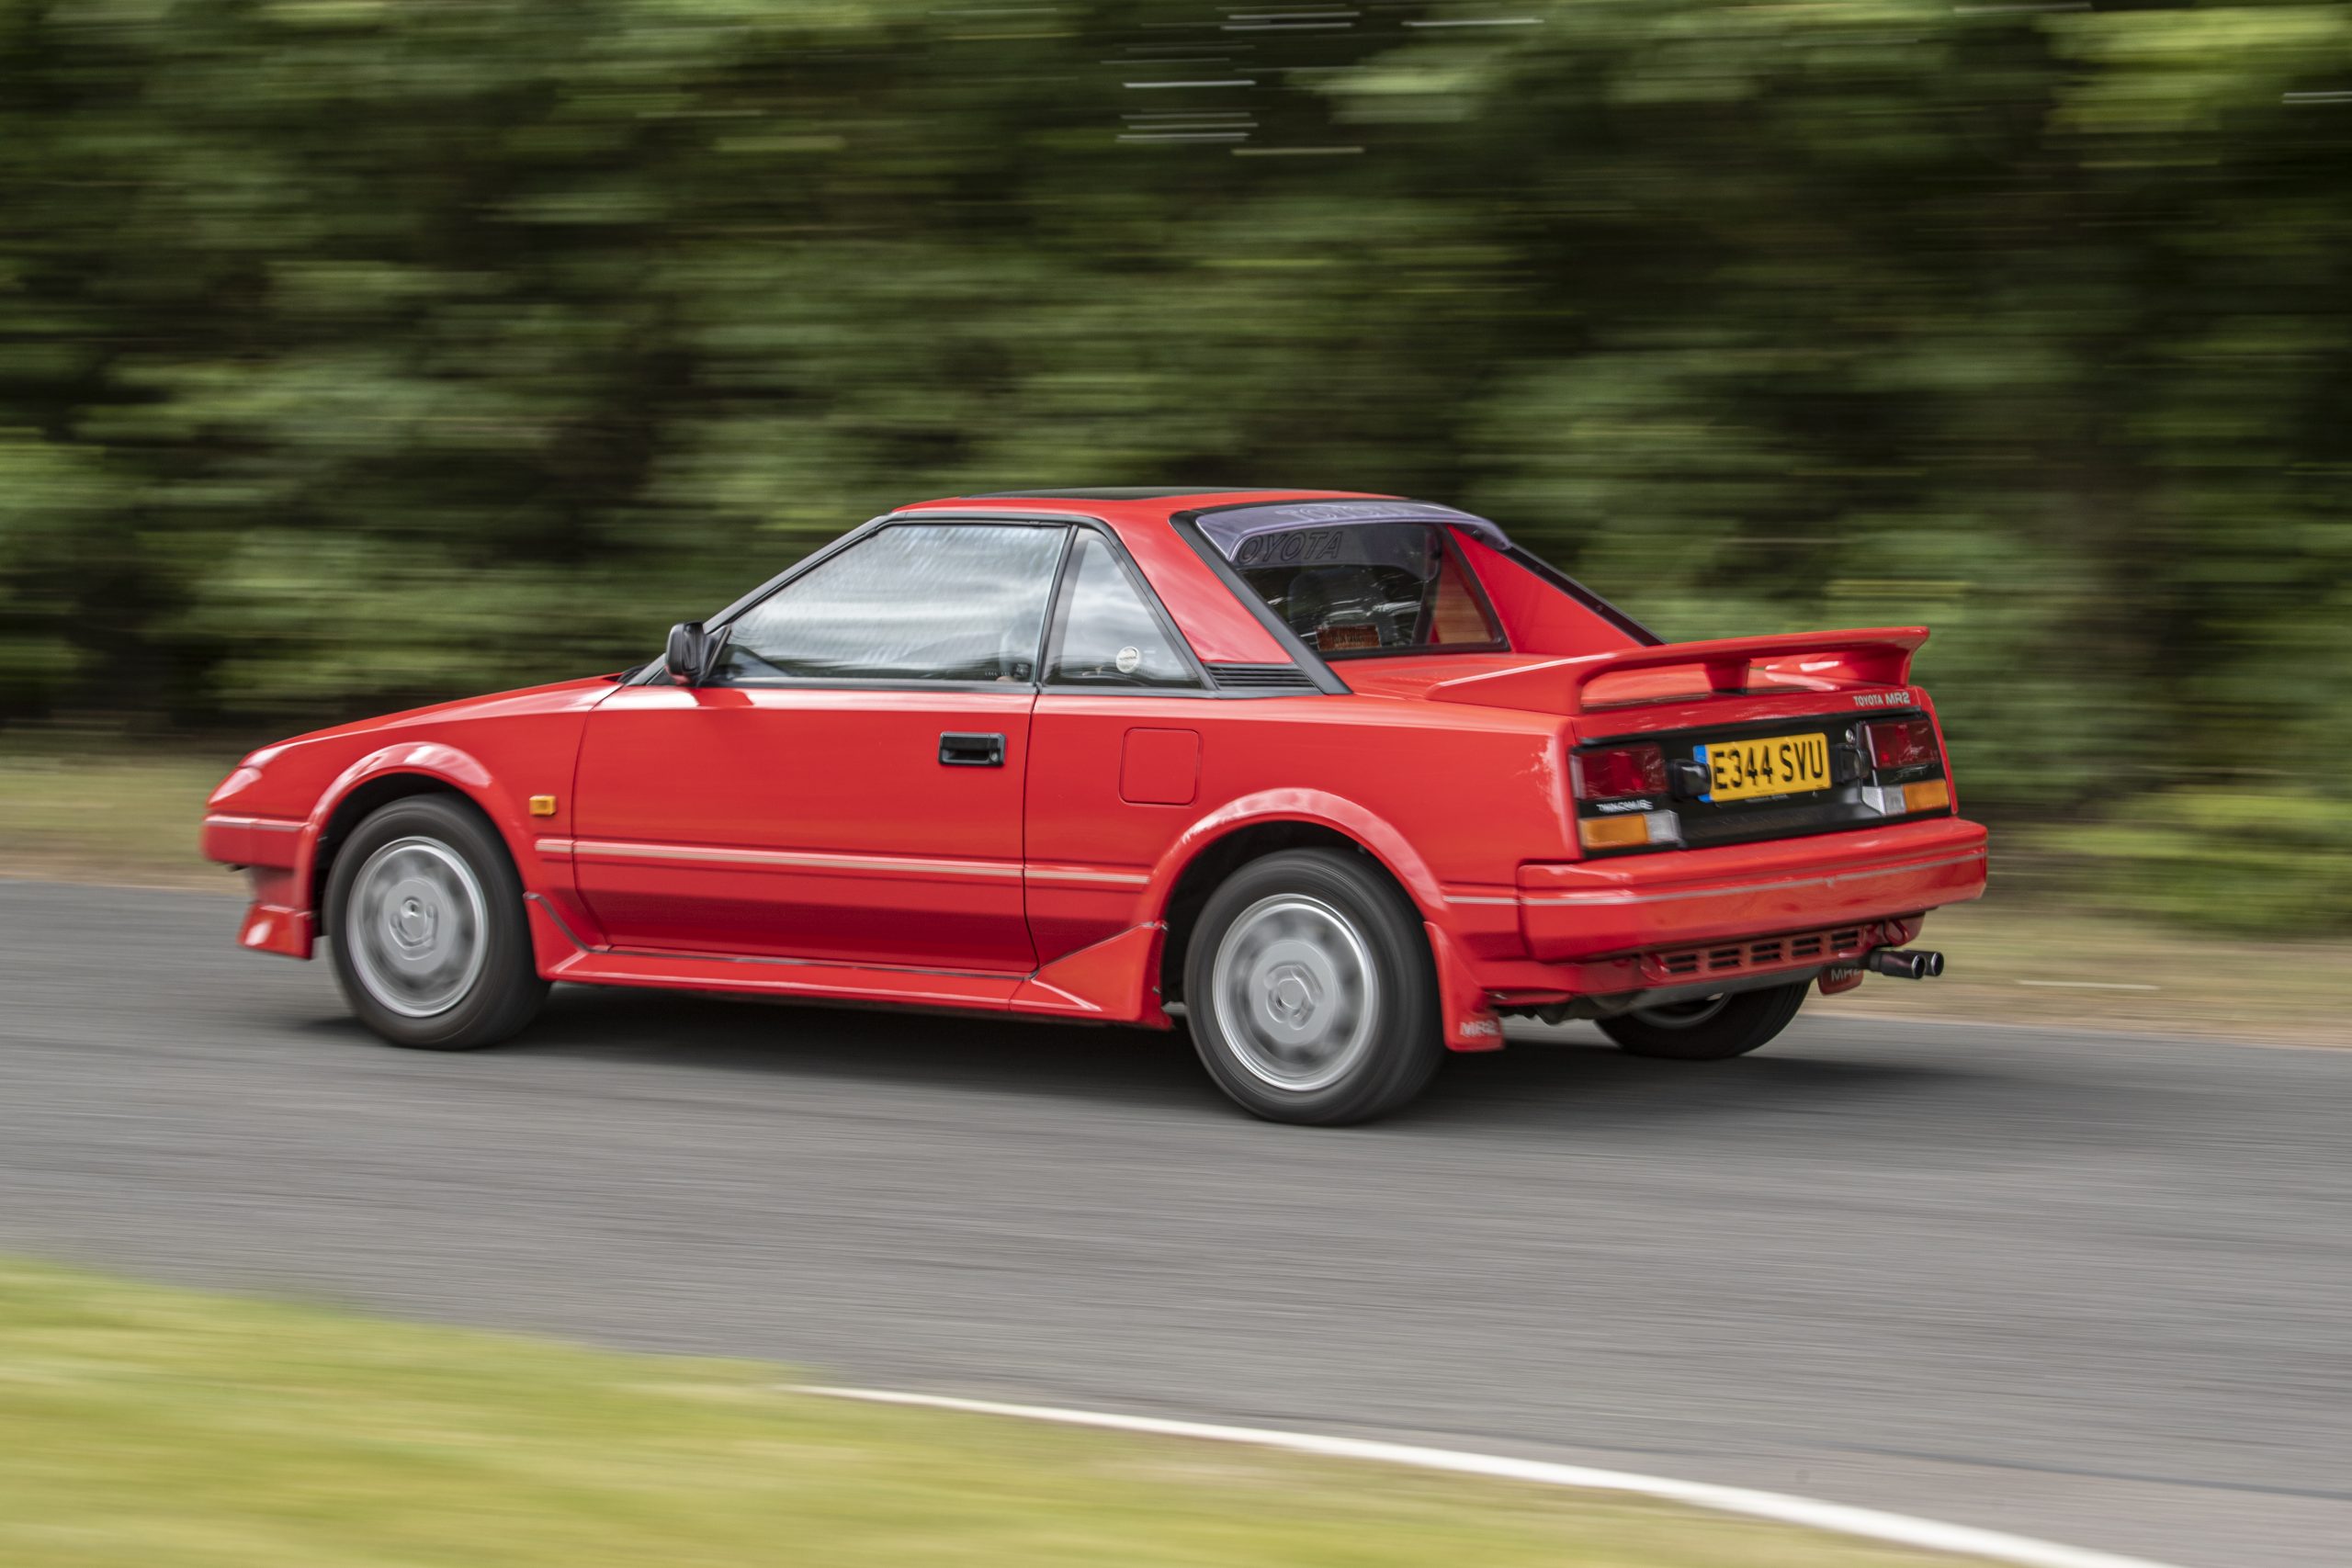 Toyota MR2 buying guide